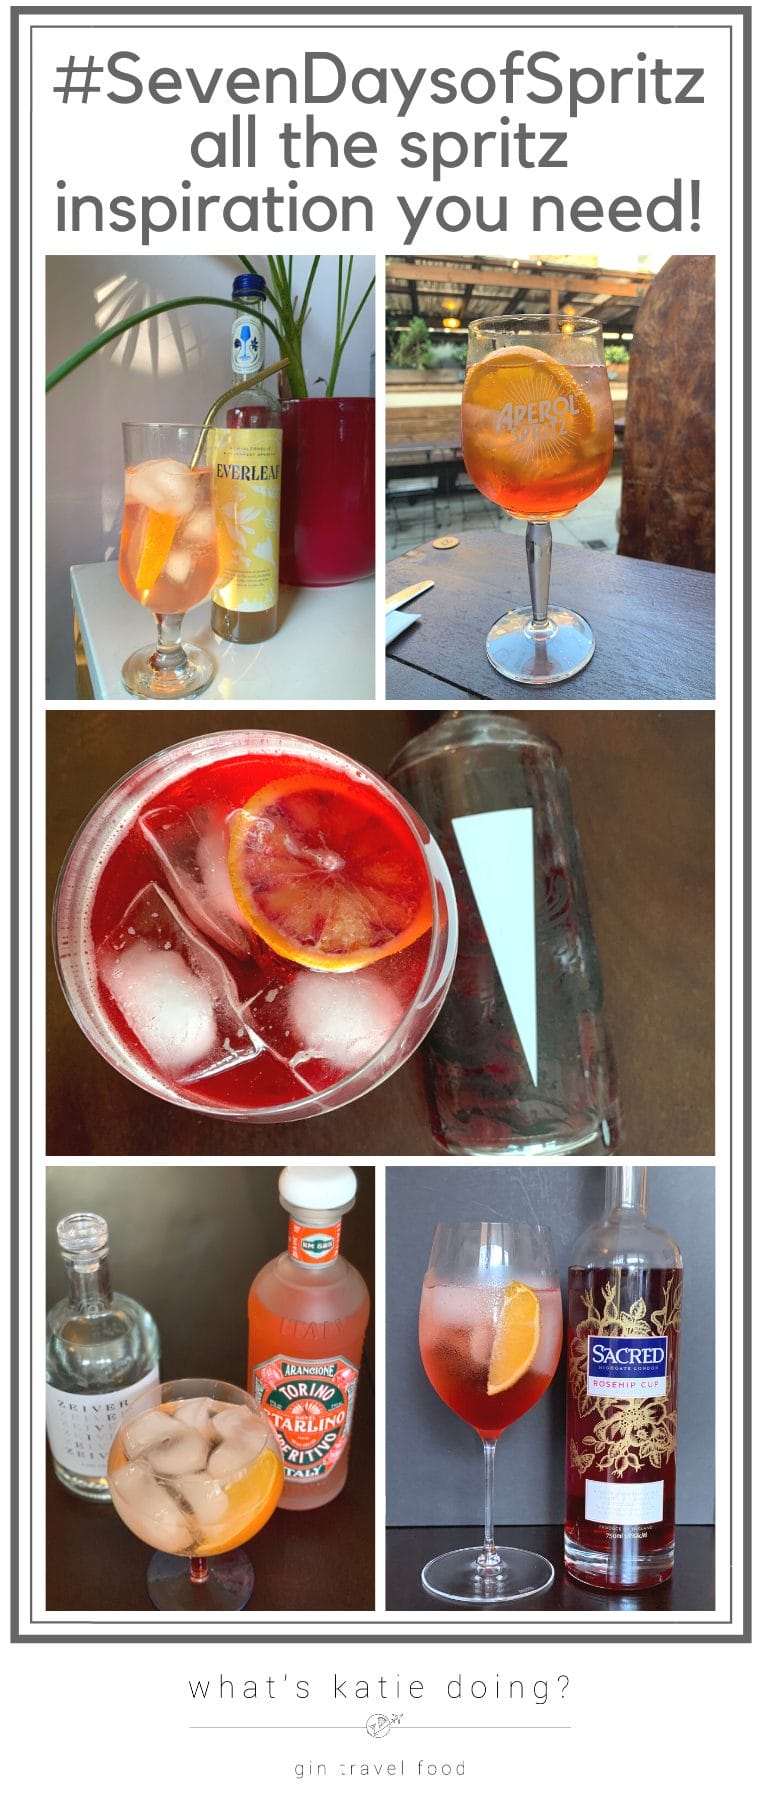 Get inspired to make and drink spritz cocktails this summer